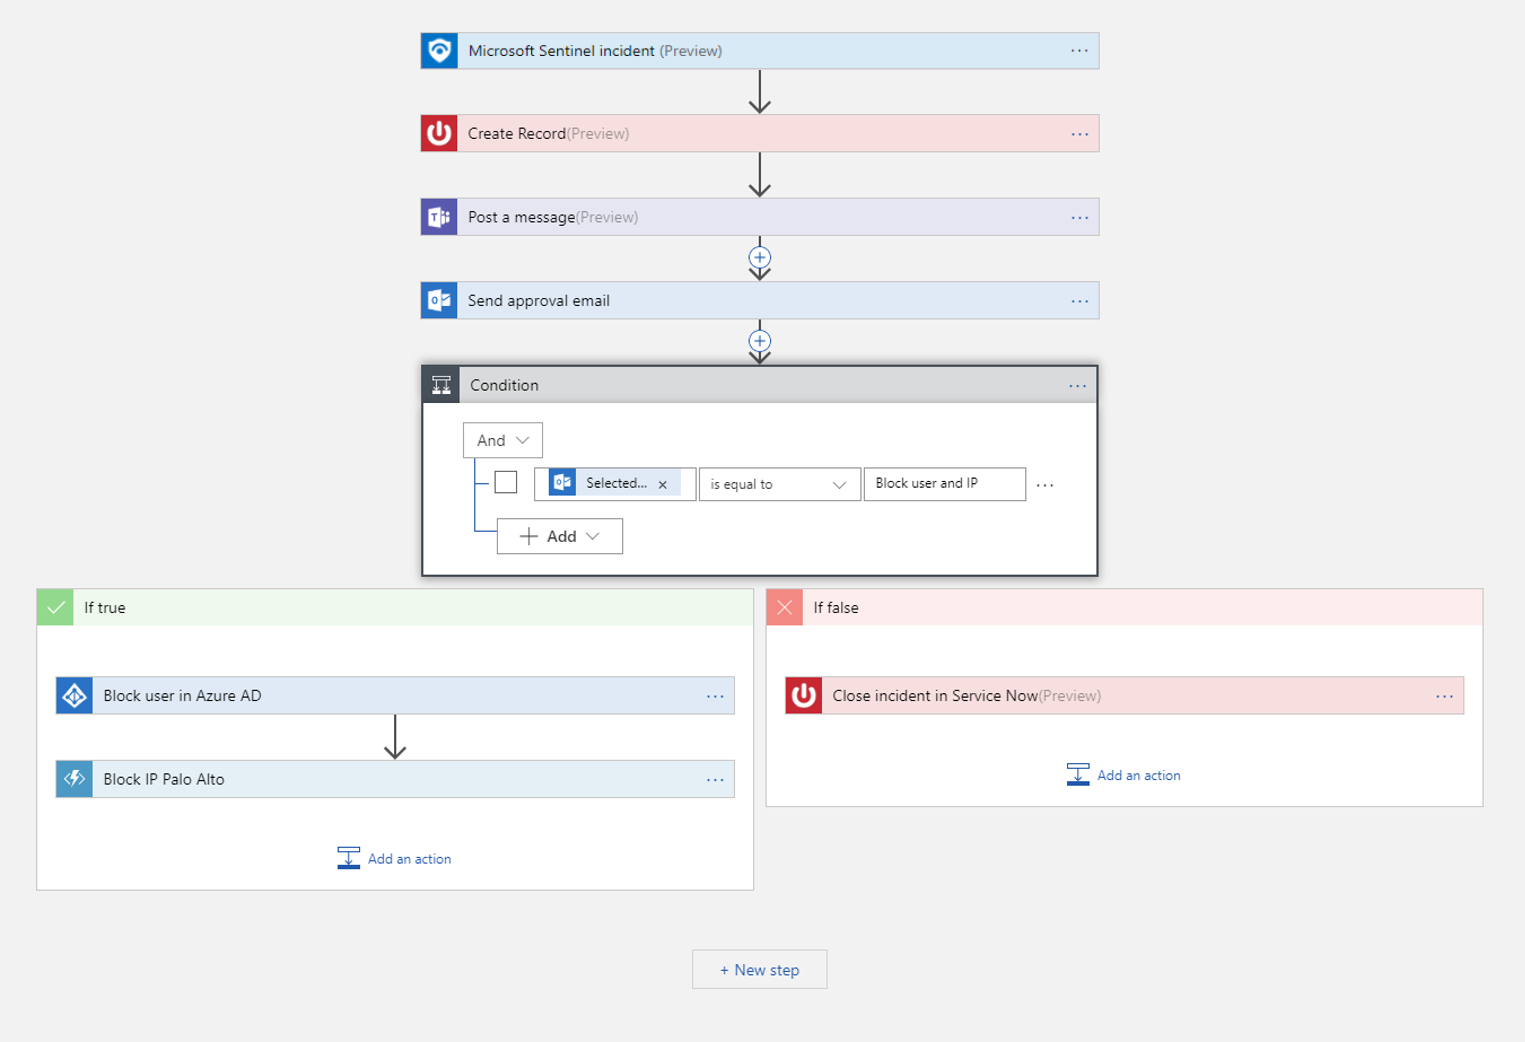 Screenshot showing the Logic App designer with an incident trigger workflow.